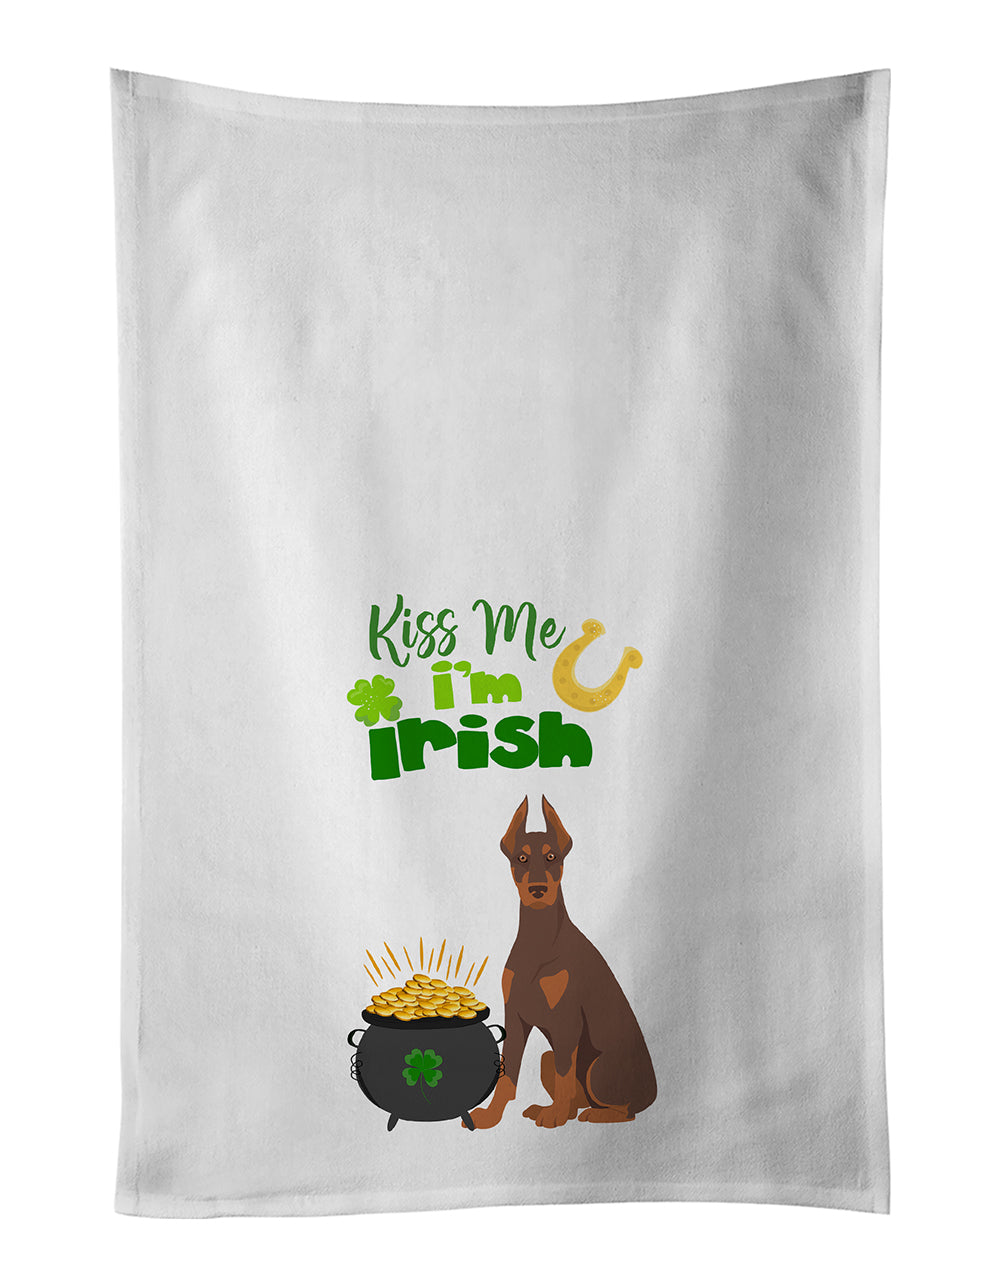 Buy this Red and Tan Doberman Pinscher St. Patrick&#39;s Day White Kitchen Towel Set of 2 Dish Towels